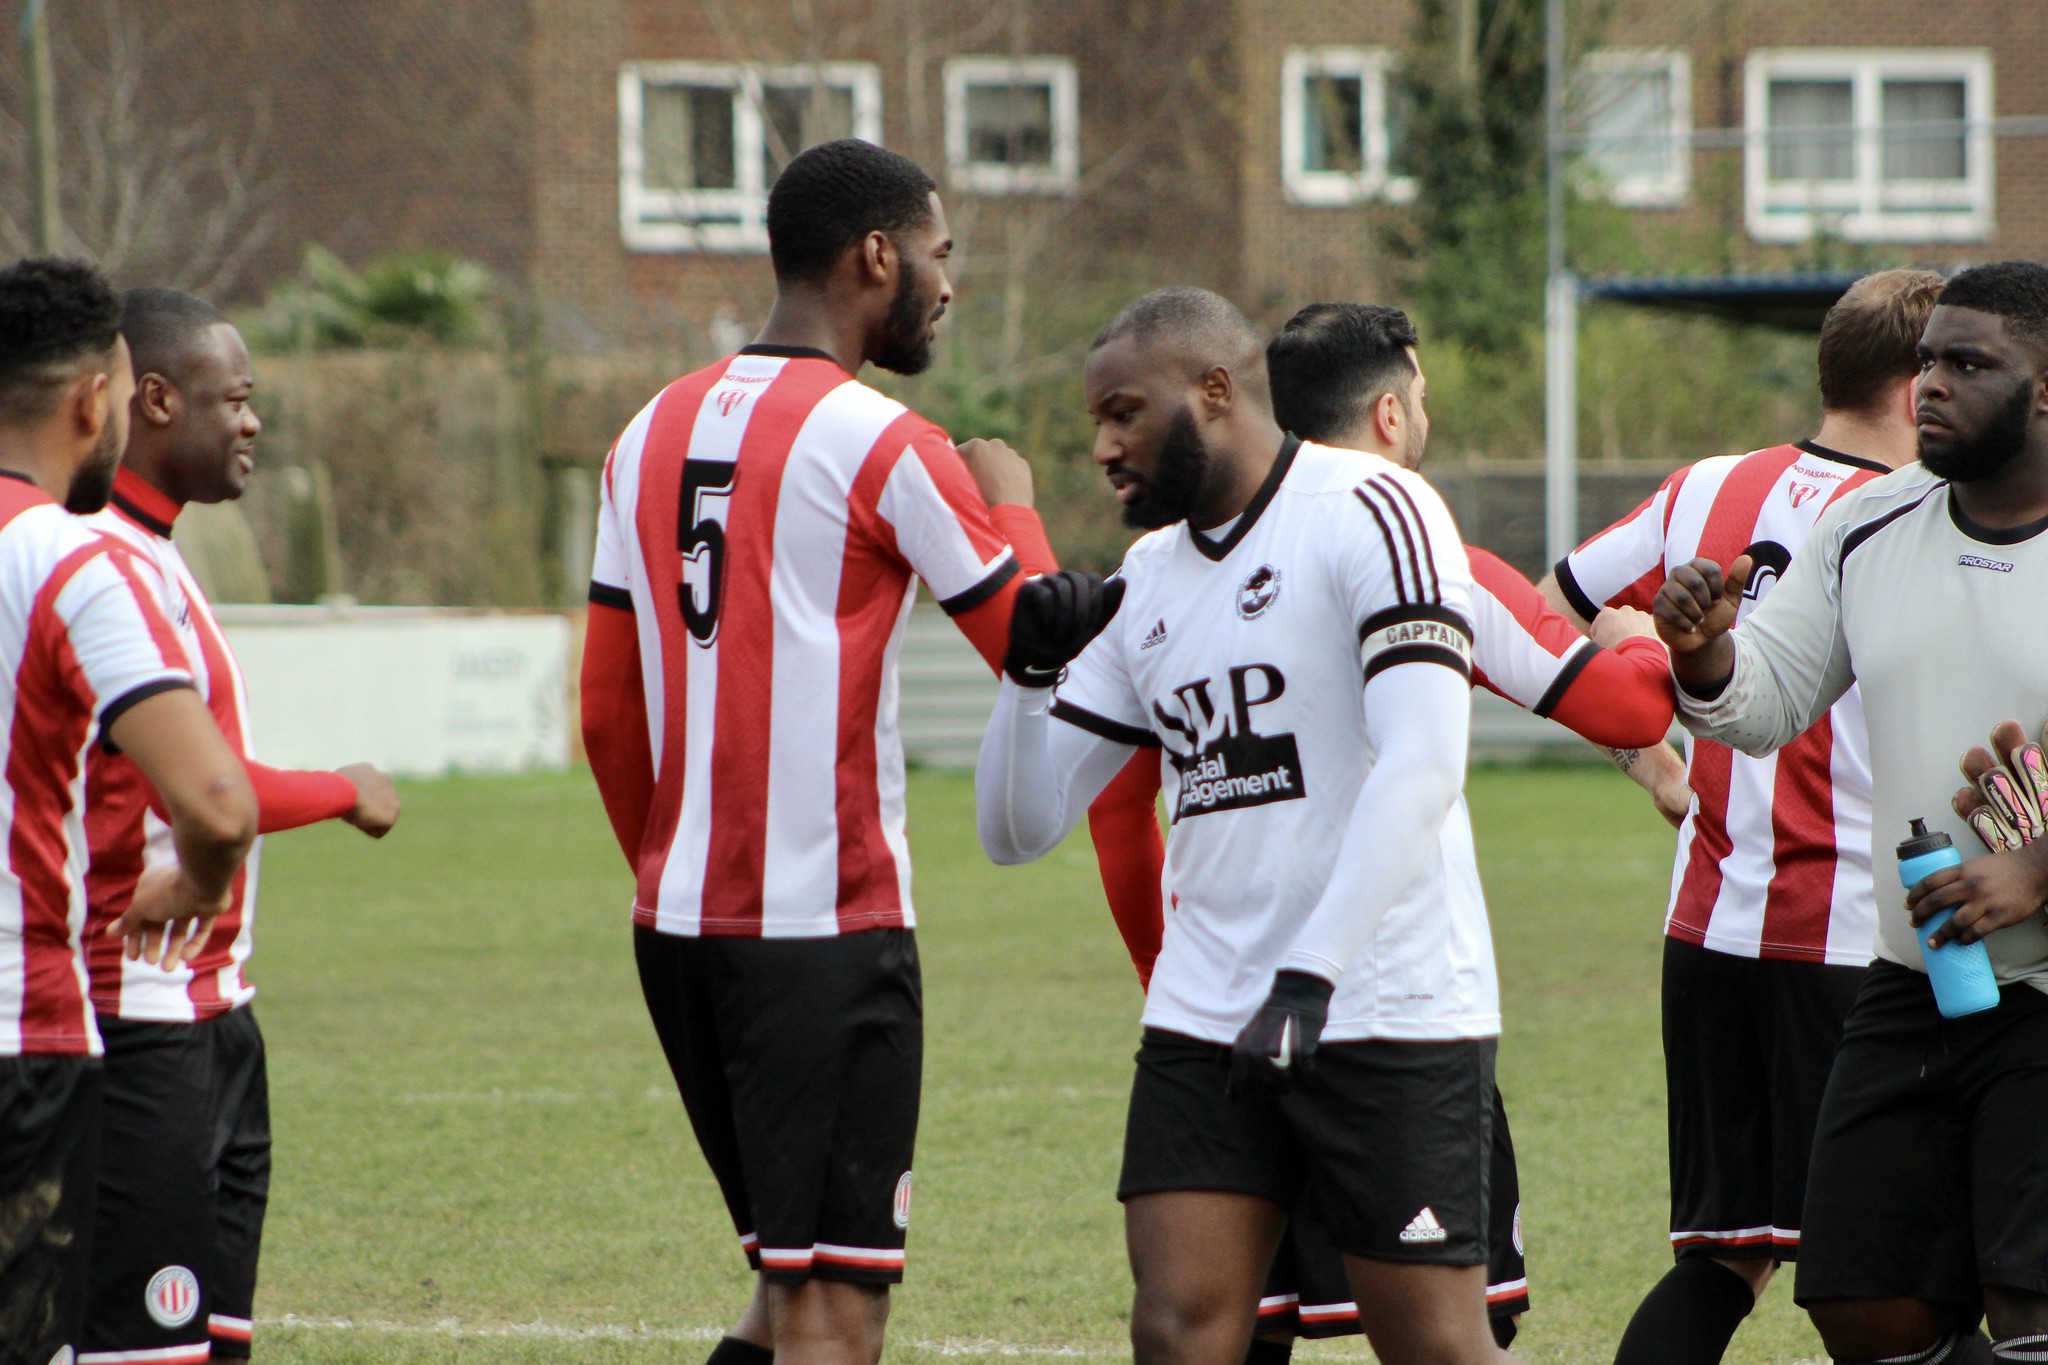 Clapton CFC 1 Cricklewood Wanderers FC 1: Hard-fought draw in trying times  - Clapton Community FC